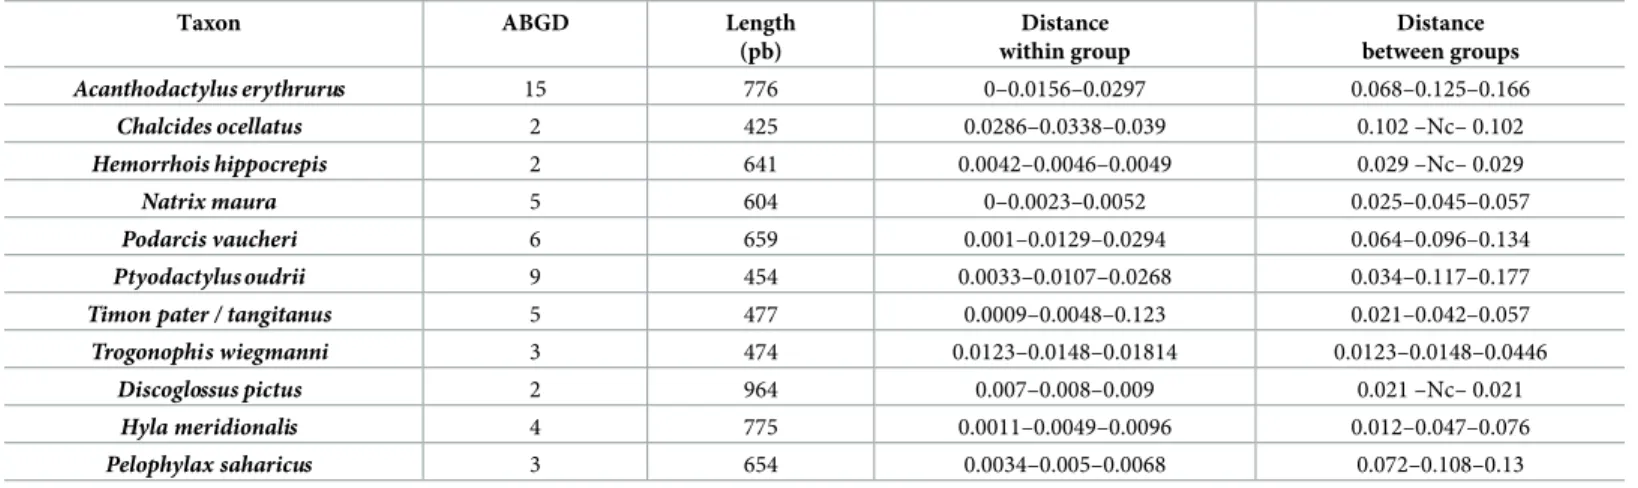 Table 2. Number of groups inferred by ABGD program, the sequences lengths, genetic distances between and within ABGD groups.